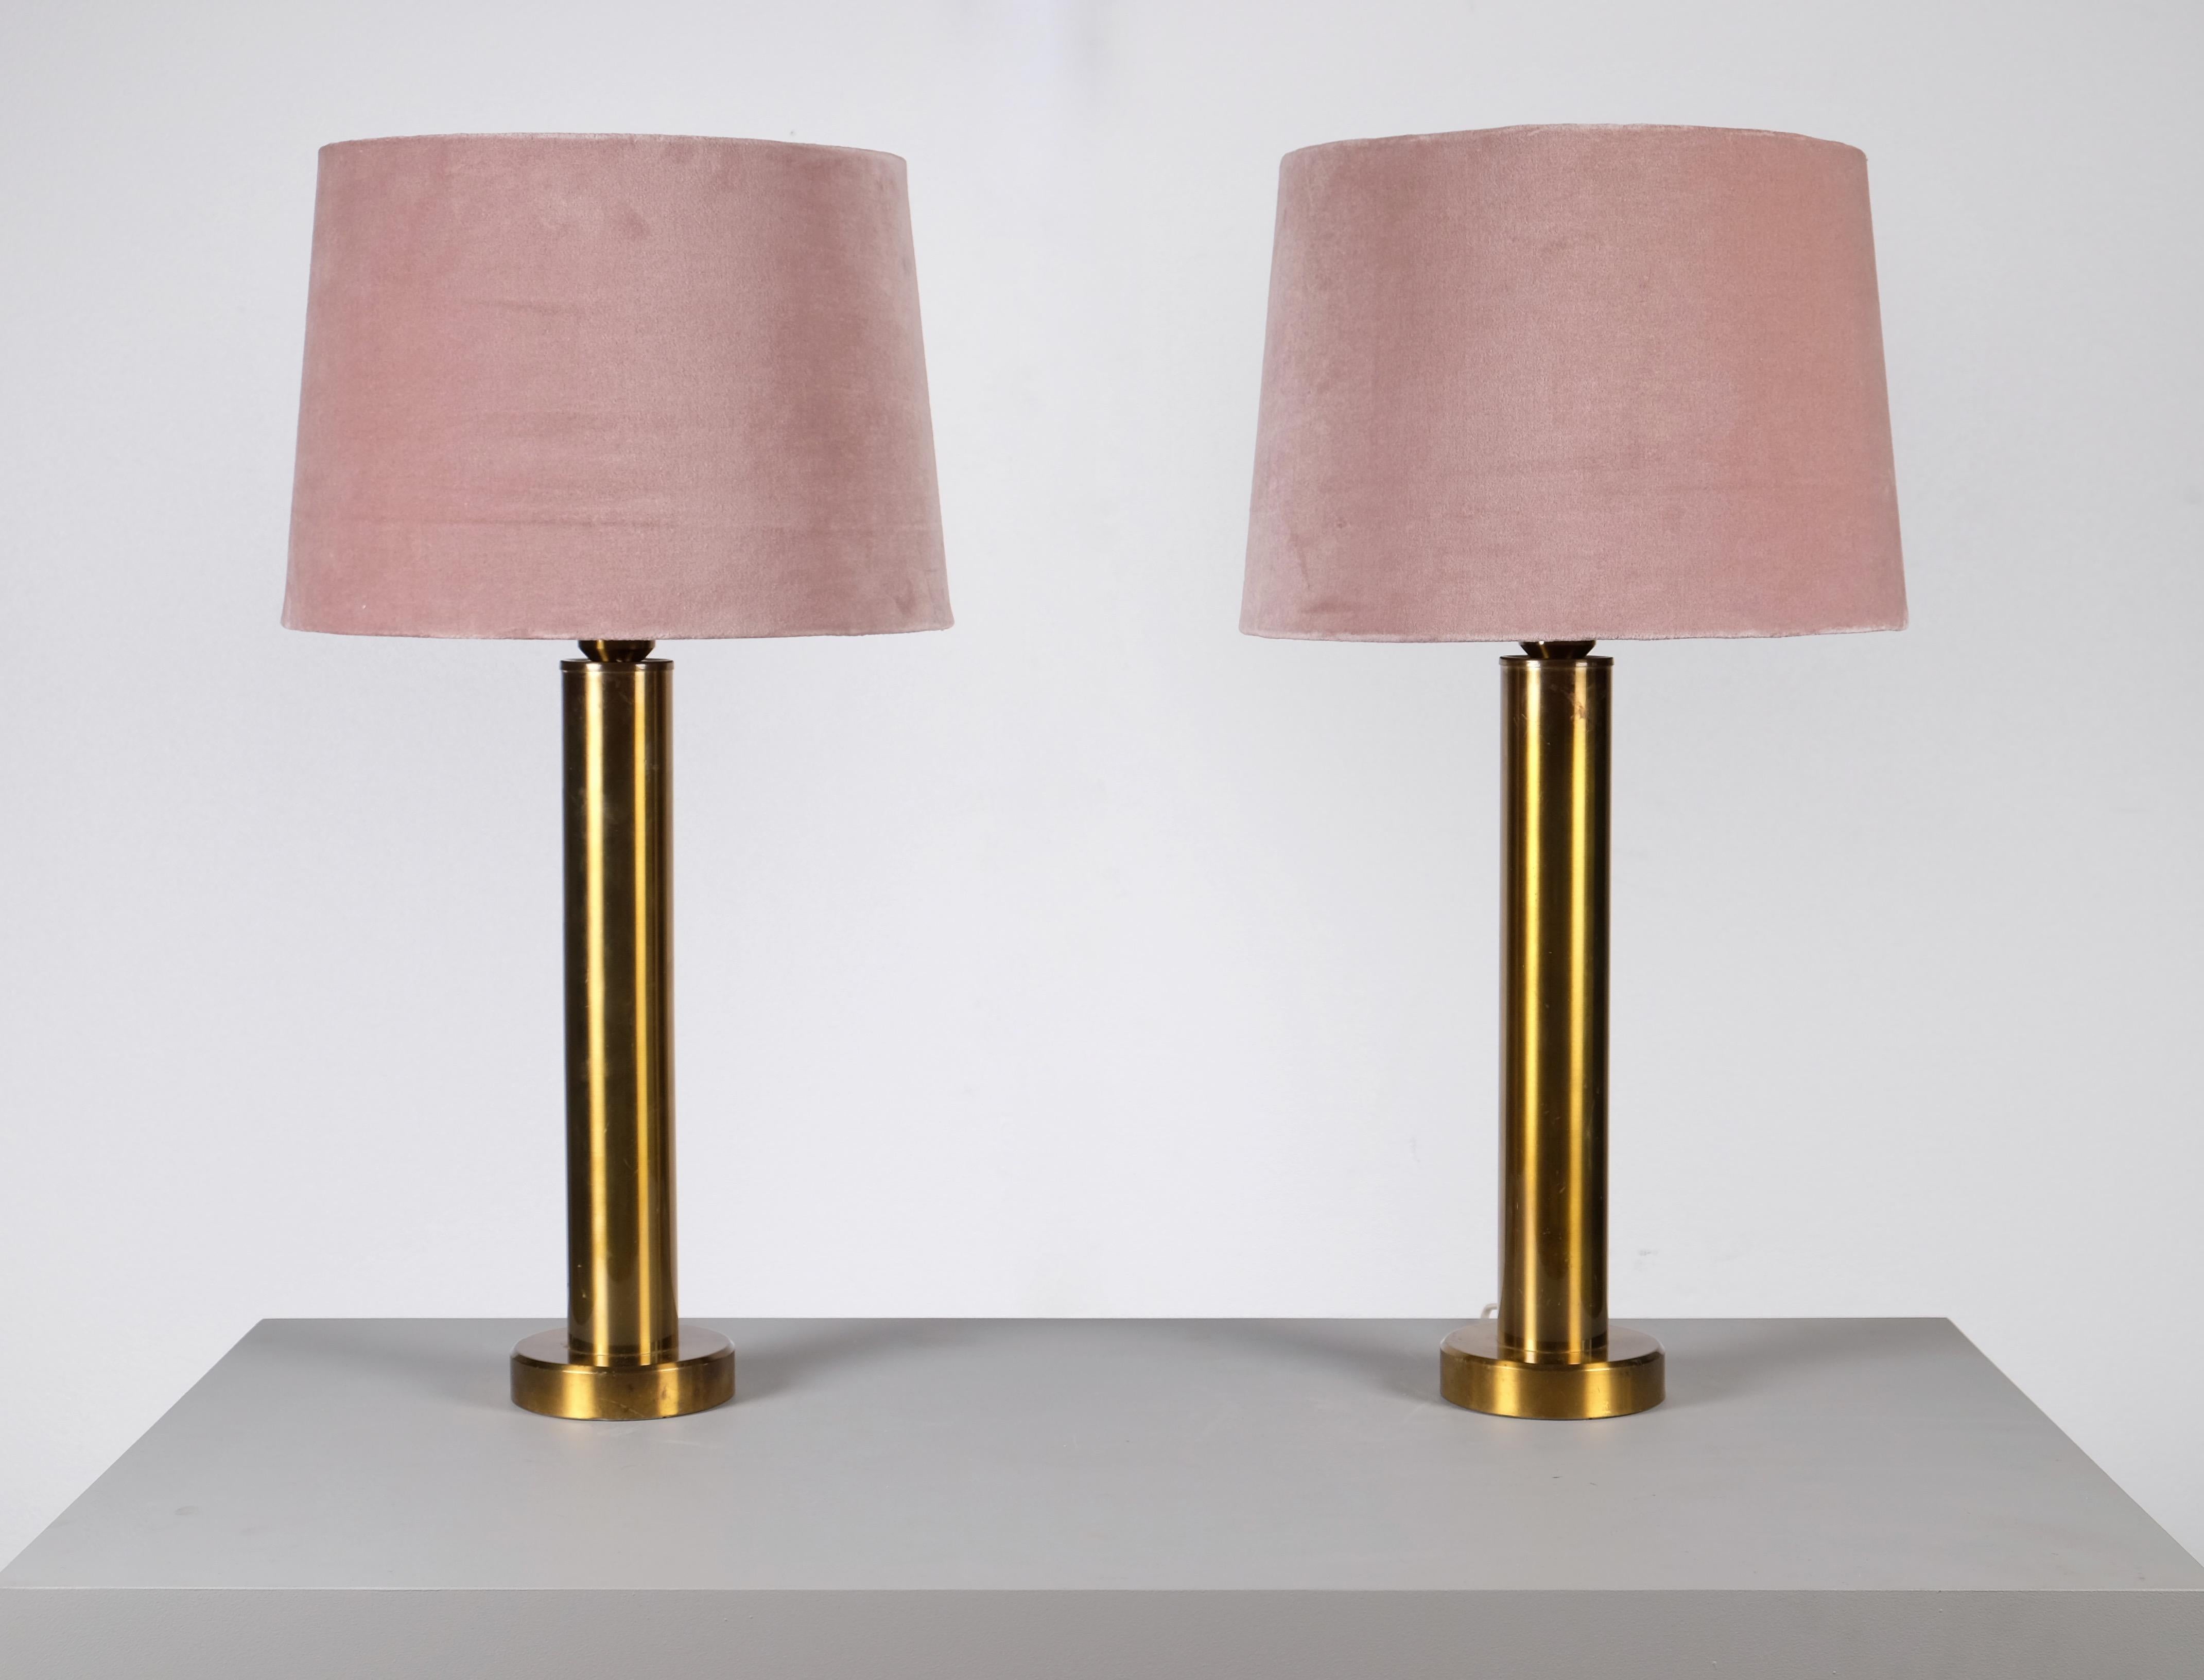 Pair of Brass Table Lamps by Kosta Belysning, Sweden, 1970s For Sale 2